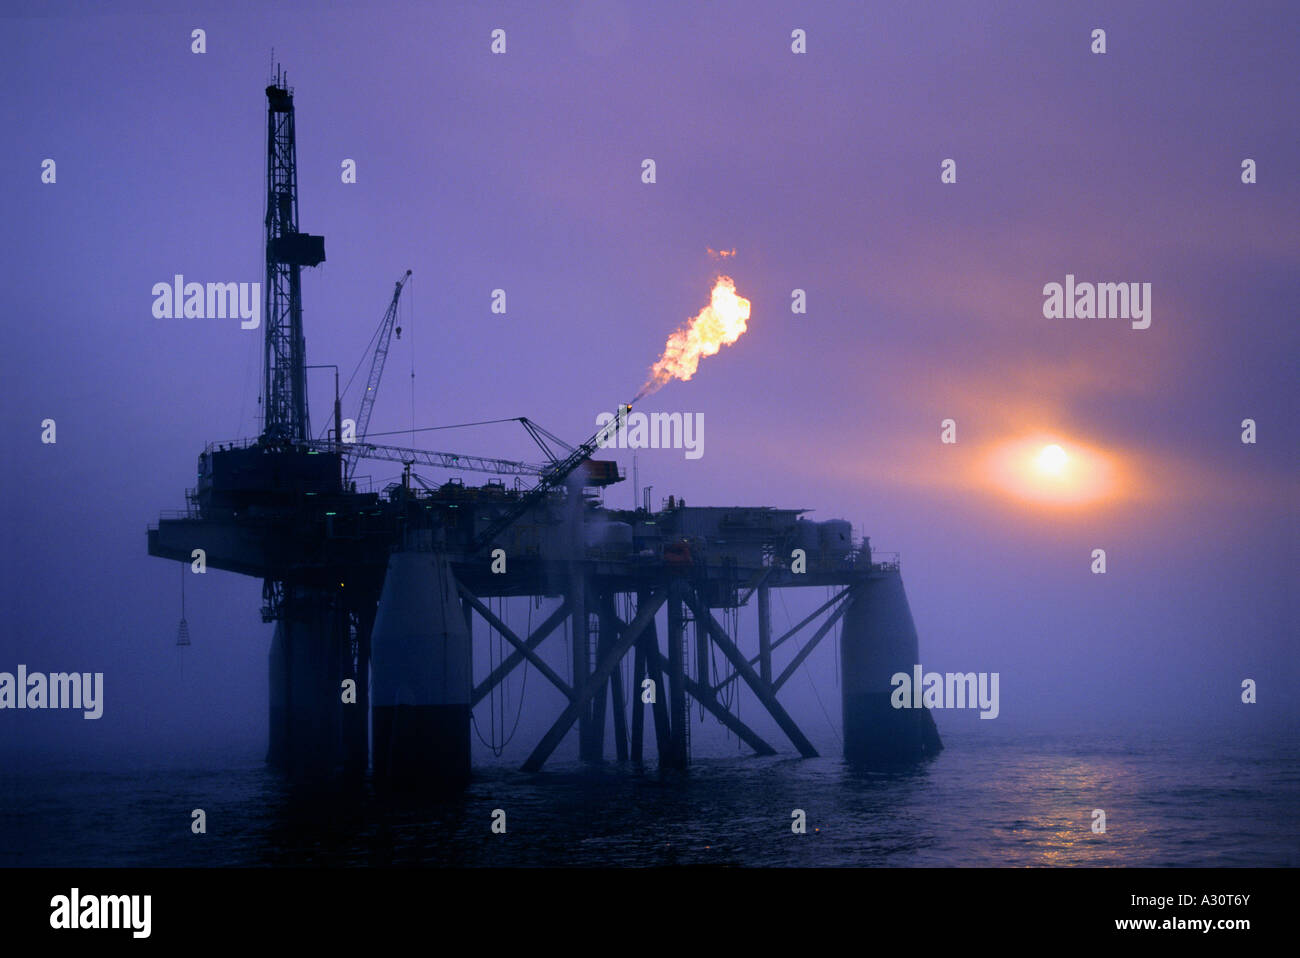 Submersible type rig flare testing a newly completed well offshore Louisiana in the Gulf of Mexico Stock Photo